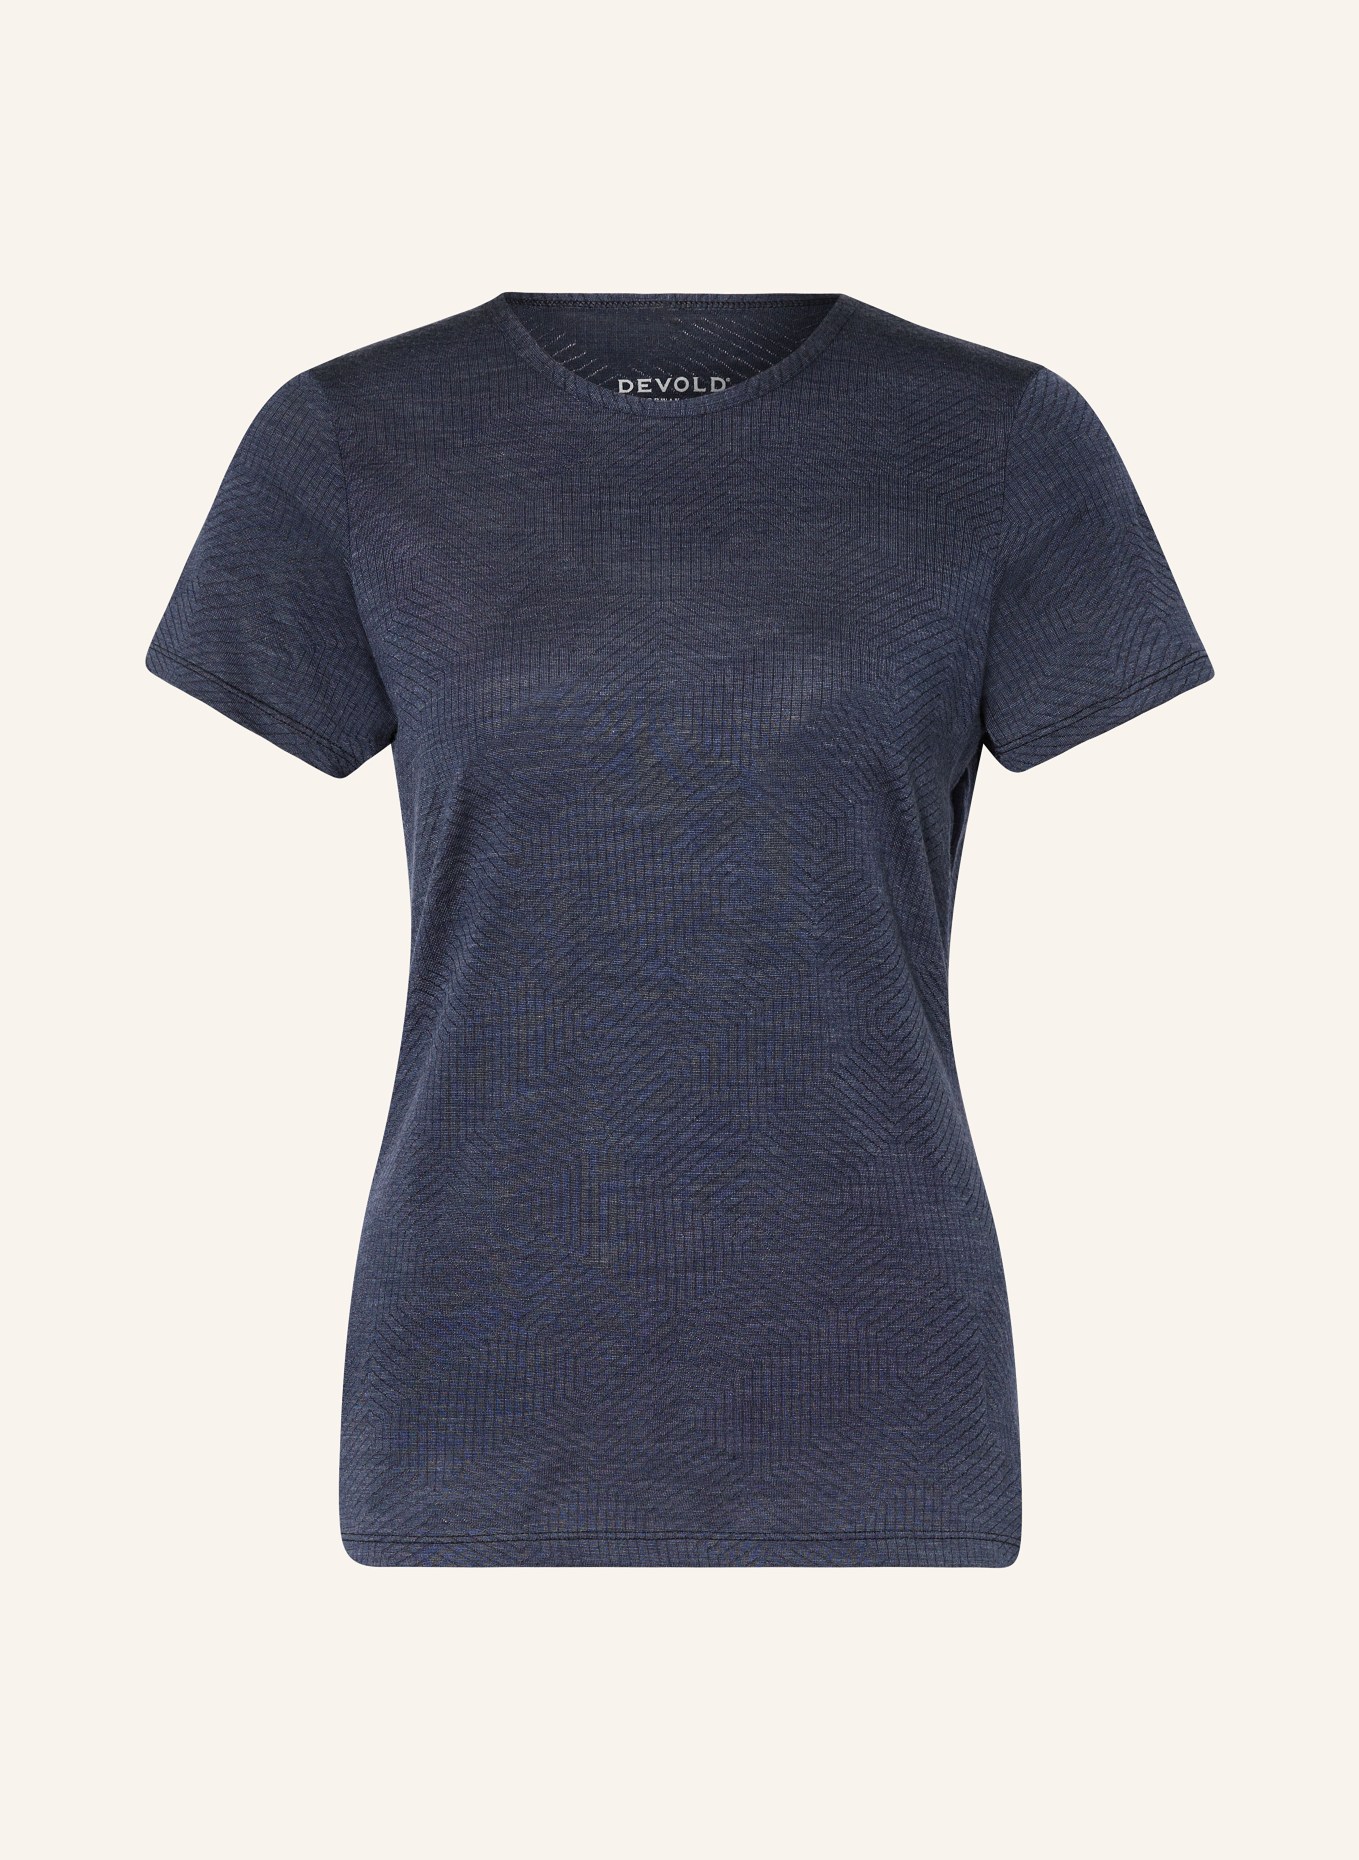 DEVOLD T-shirt CILIA made of merino wool, Color: BLUE (Image 1)